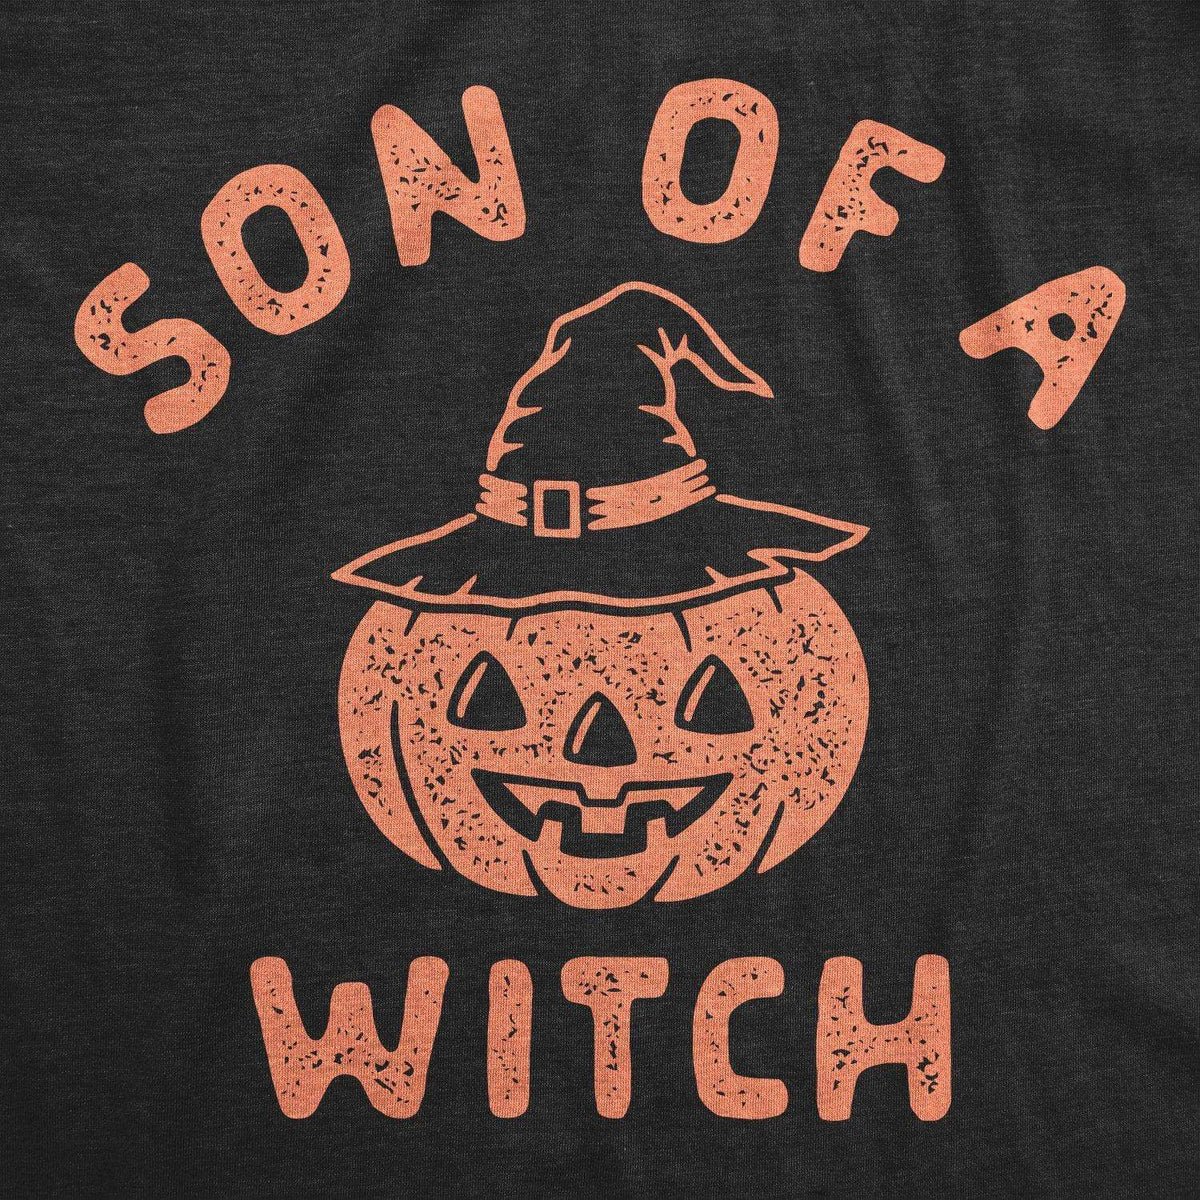 Son Of A Witch Baby Bodysuit - Crazy Dog T-Shirts